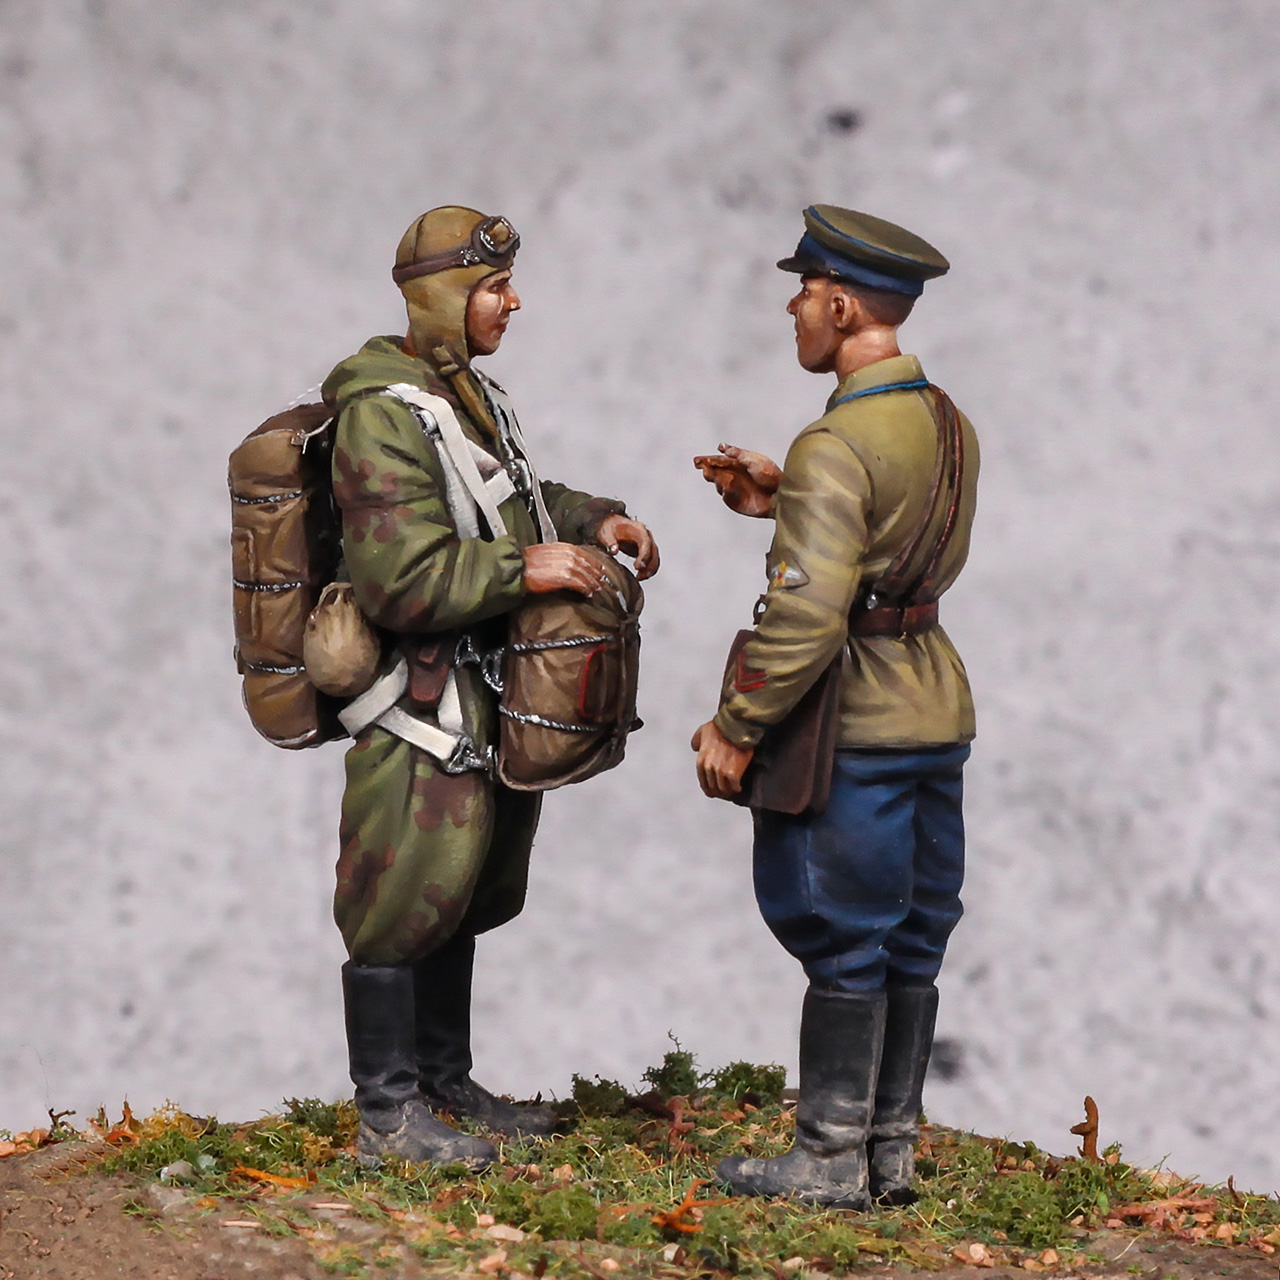 Figures: Red Army airborne commanders, 1941, photo #4